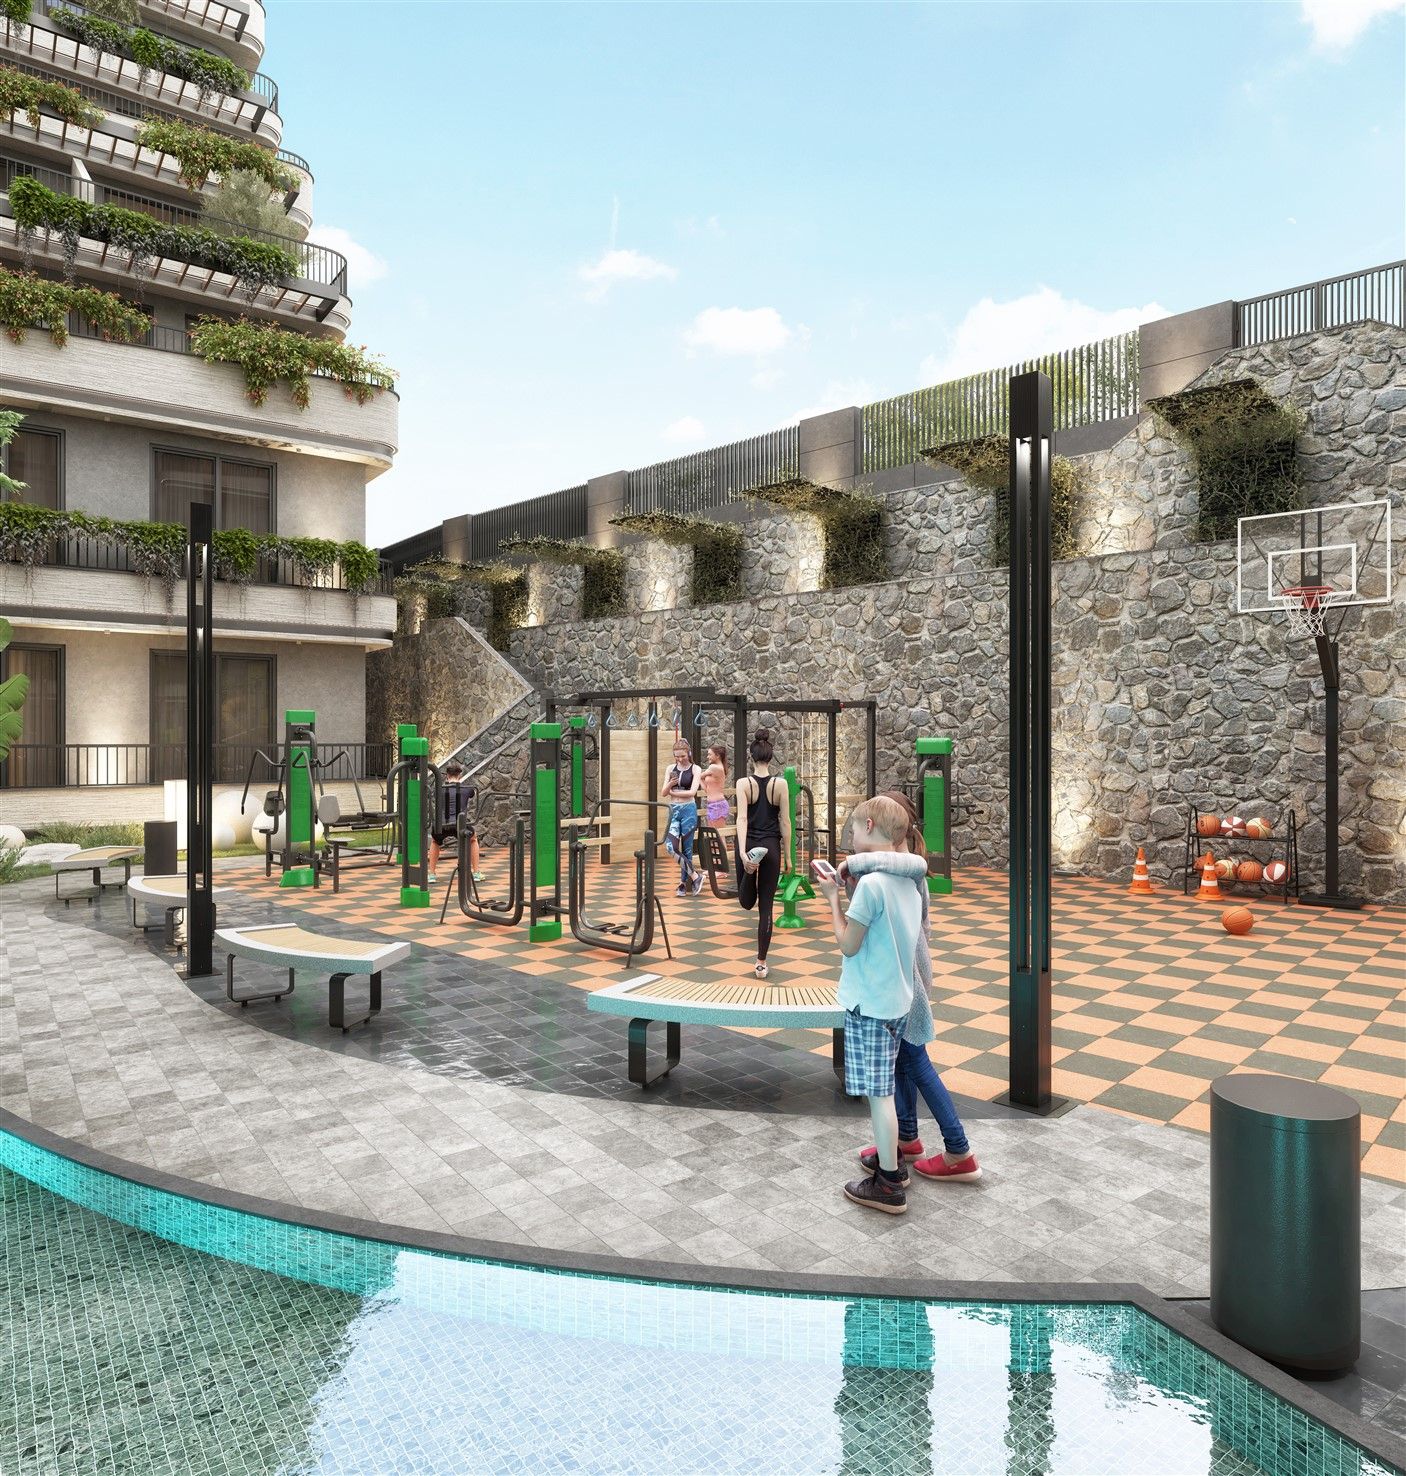 Project with a prime location in the picturesque Üsküdar district